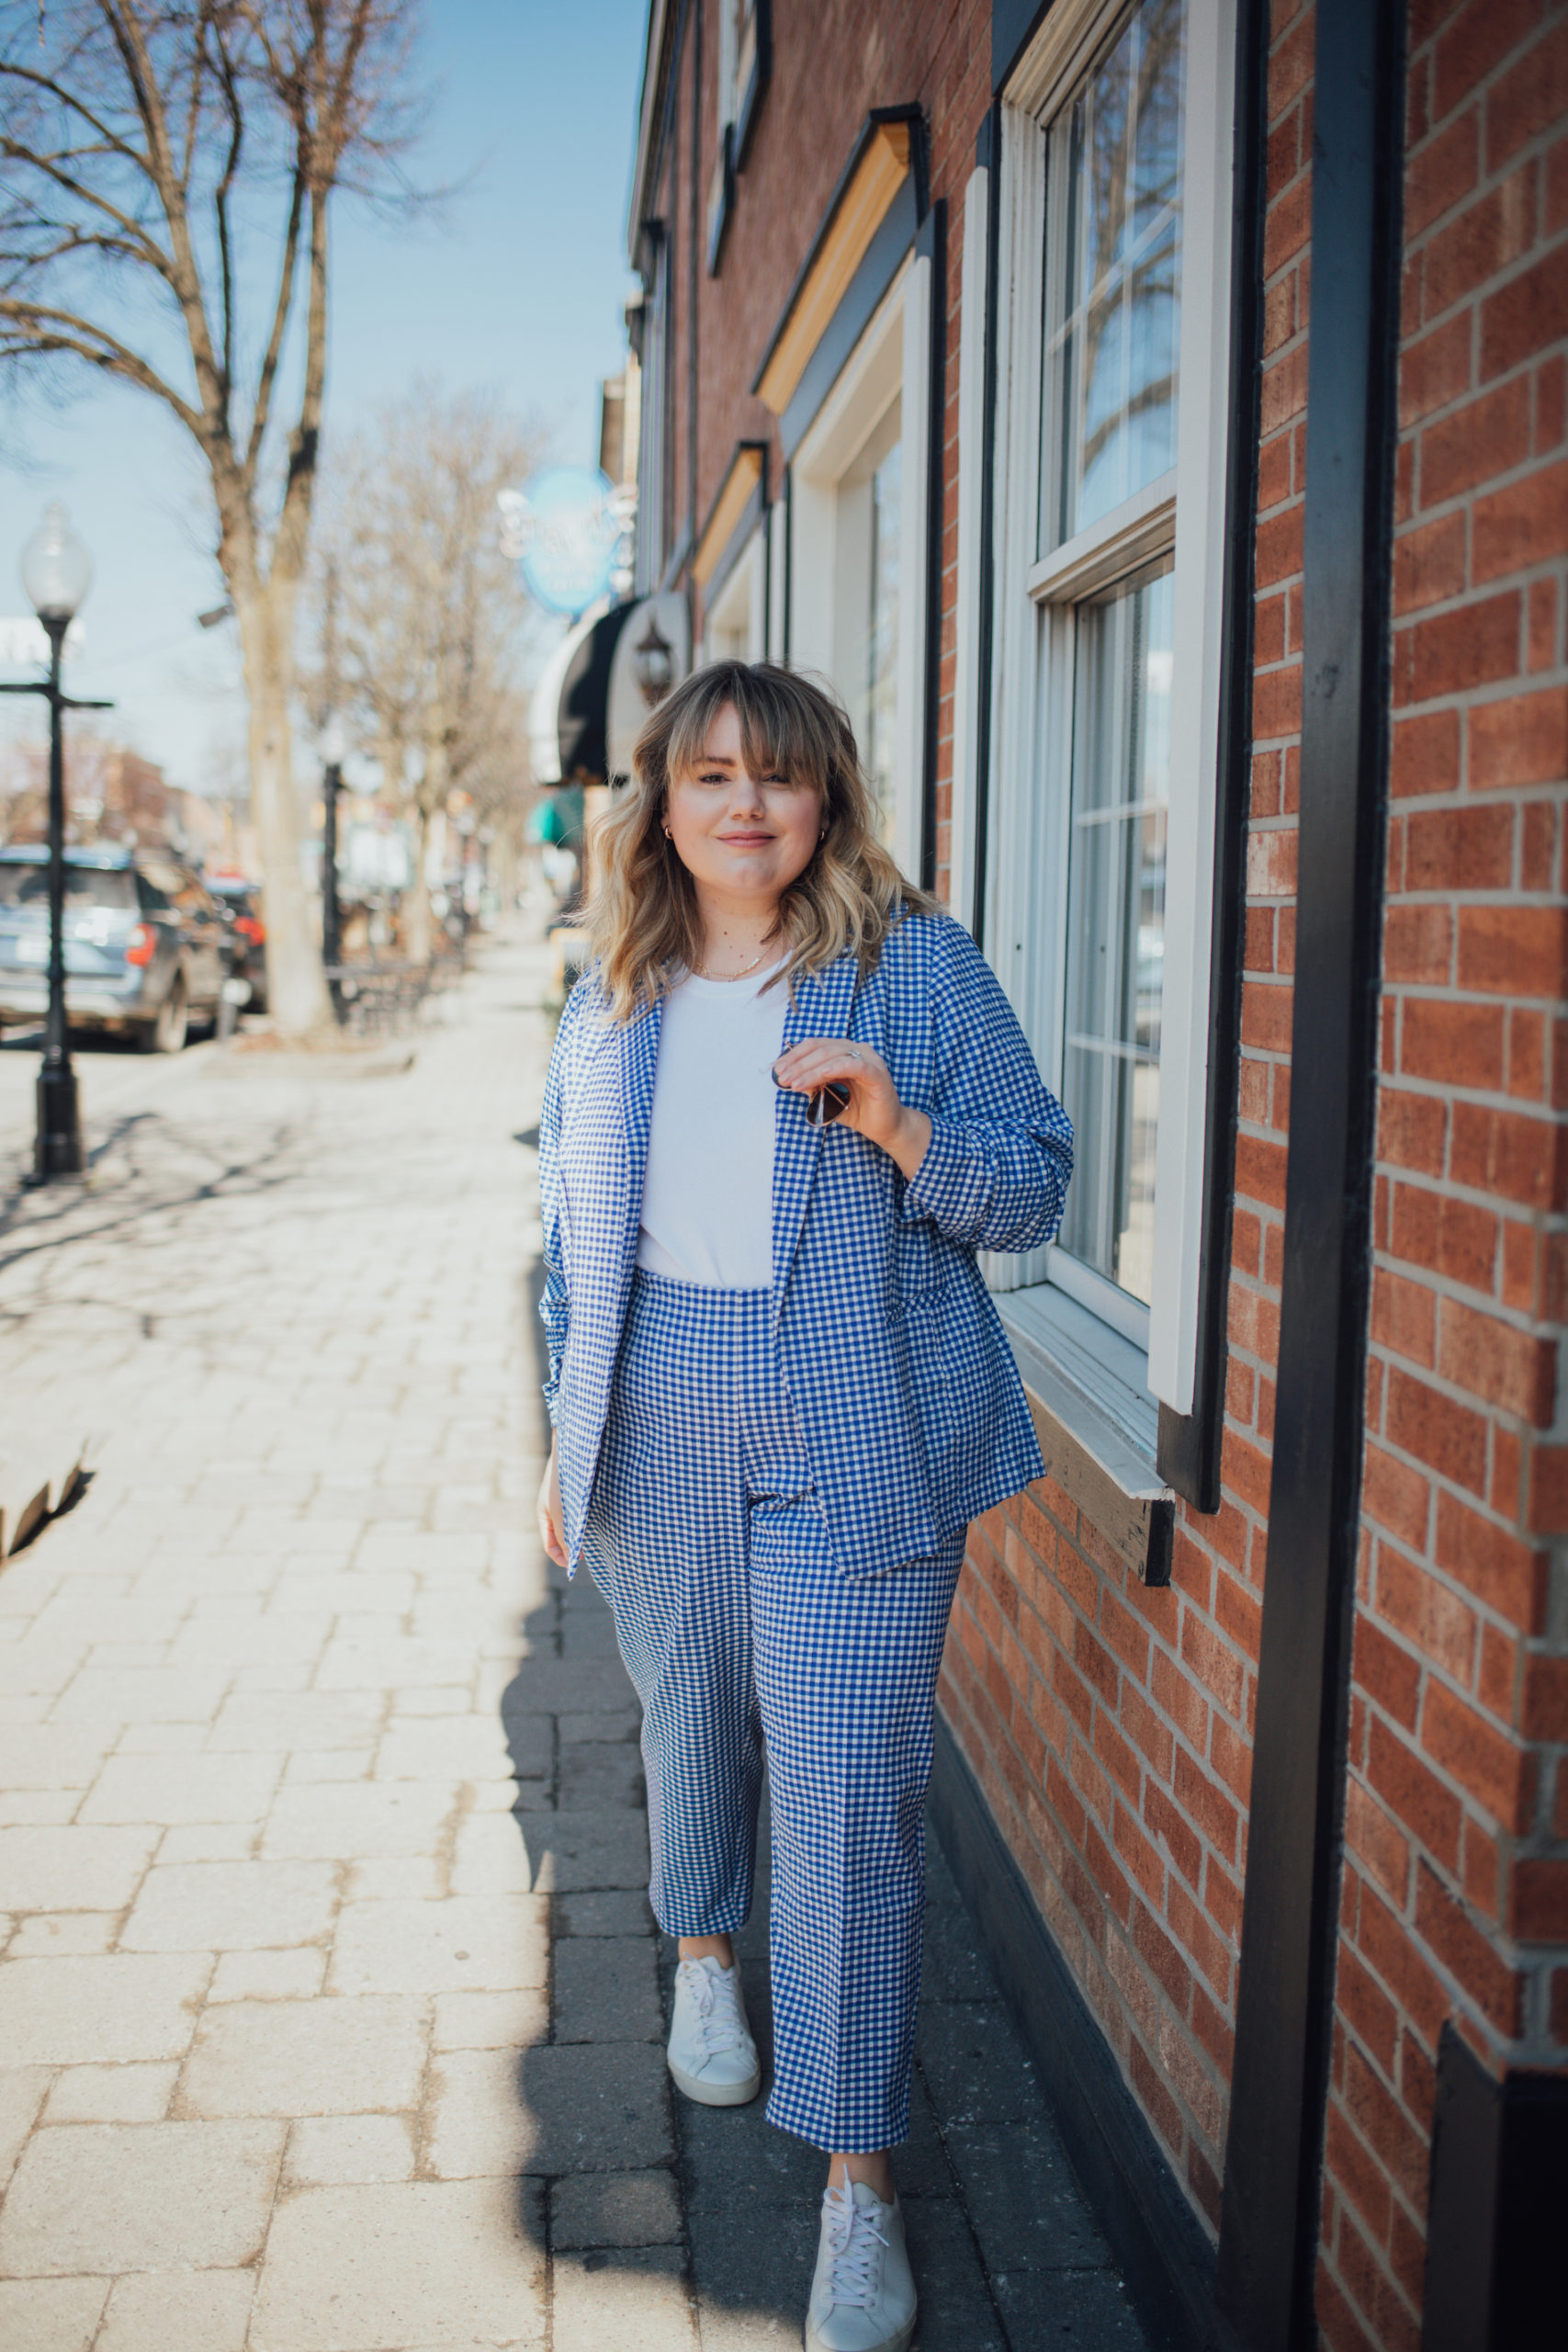 Gingham Suit For Spring. Sharing a fabulous spring ready look from Cato! Wear this chic suit out for everything from coffee to the office.  